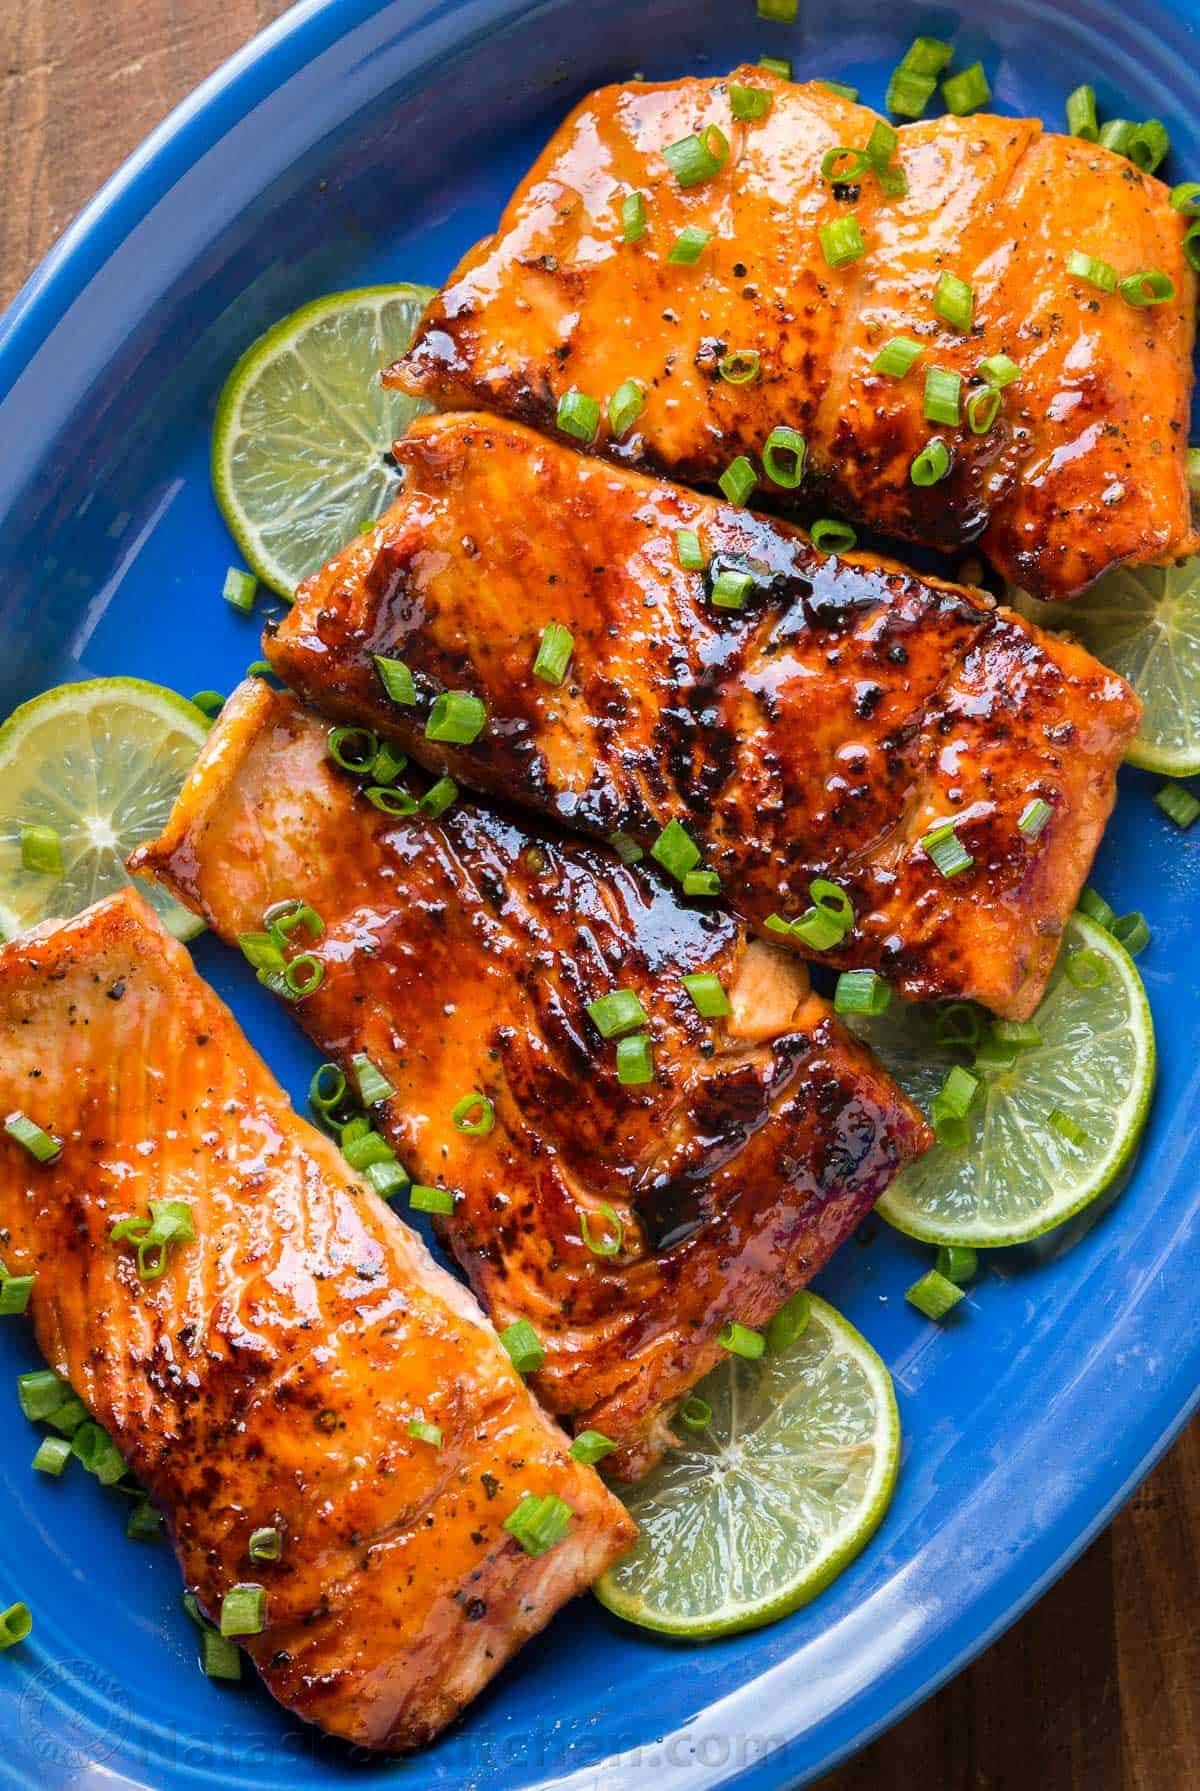 Honey glazed salmon belly garnished with chopped onion leaves and sliced lime served on a blue plate.